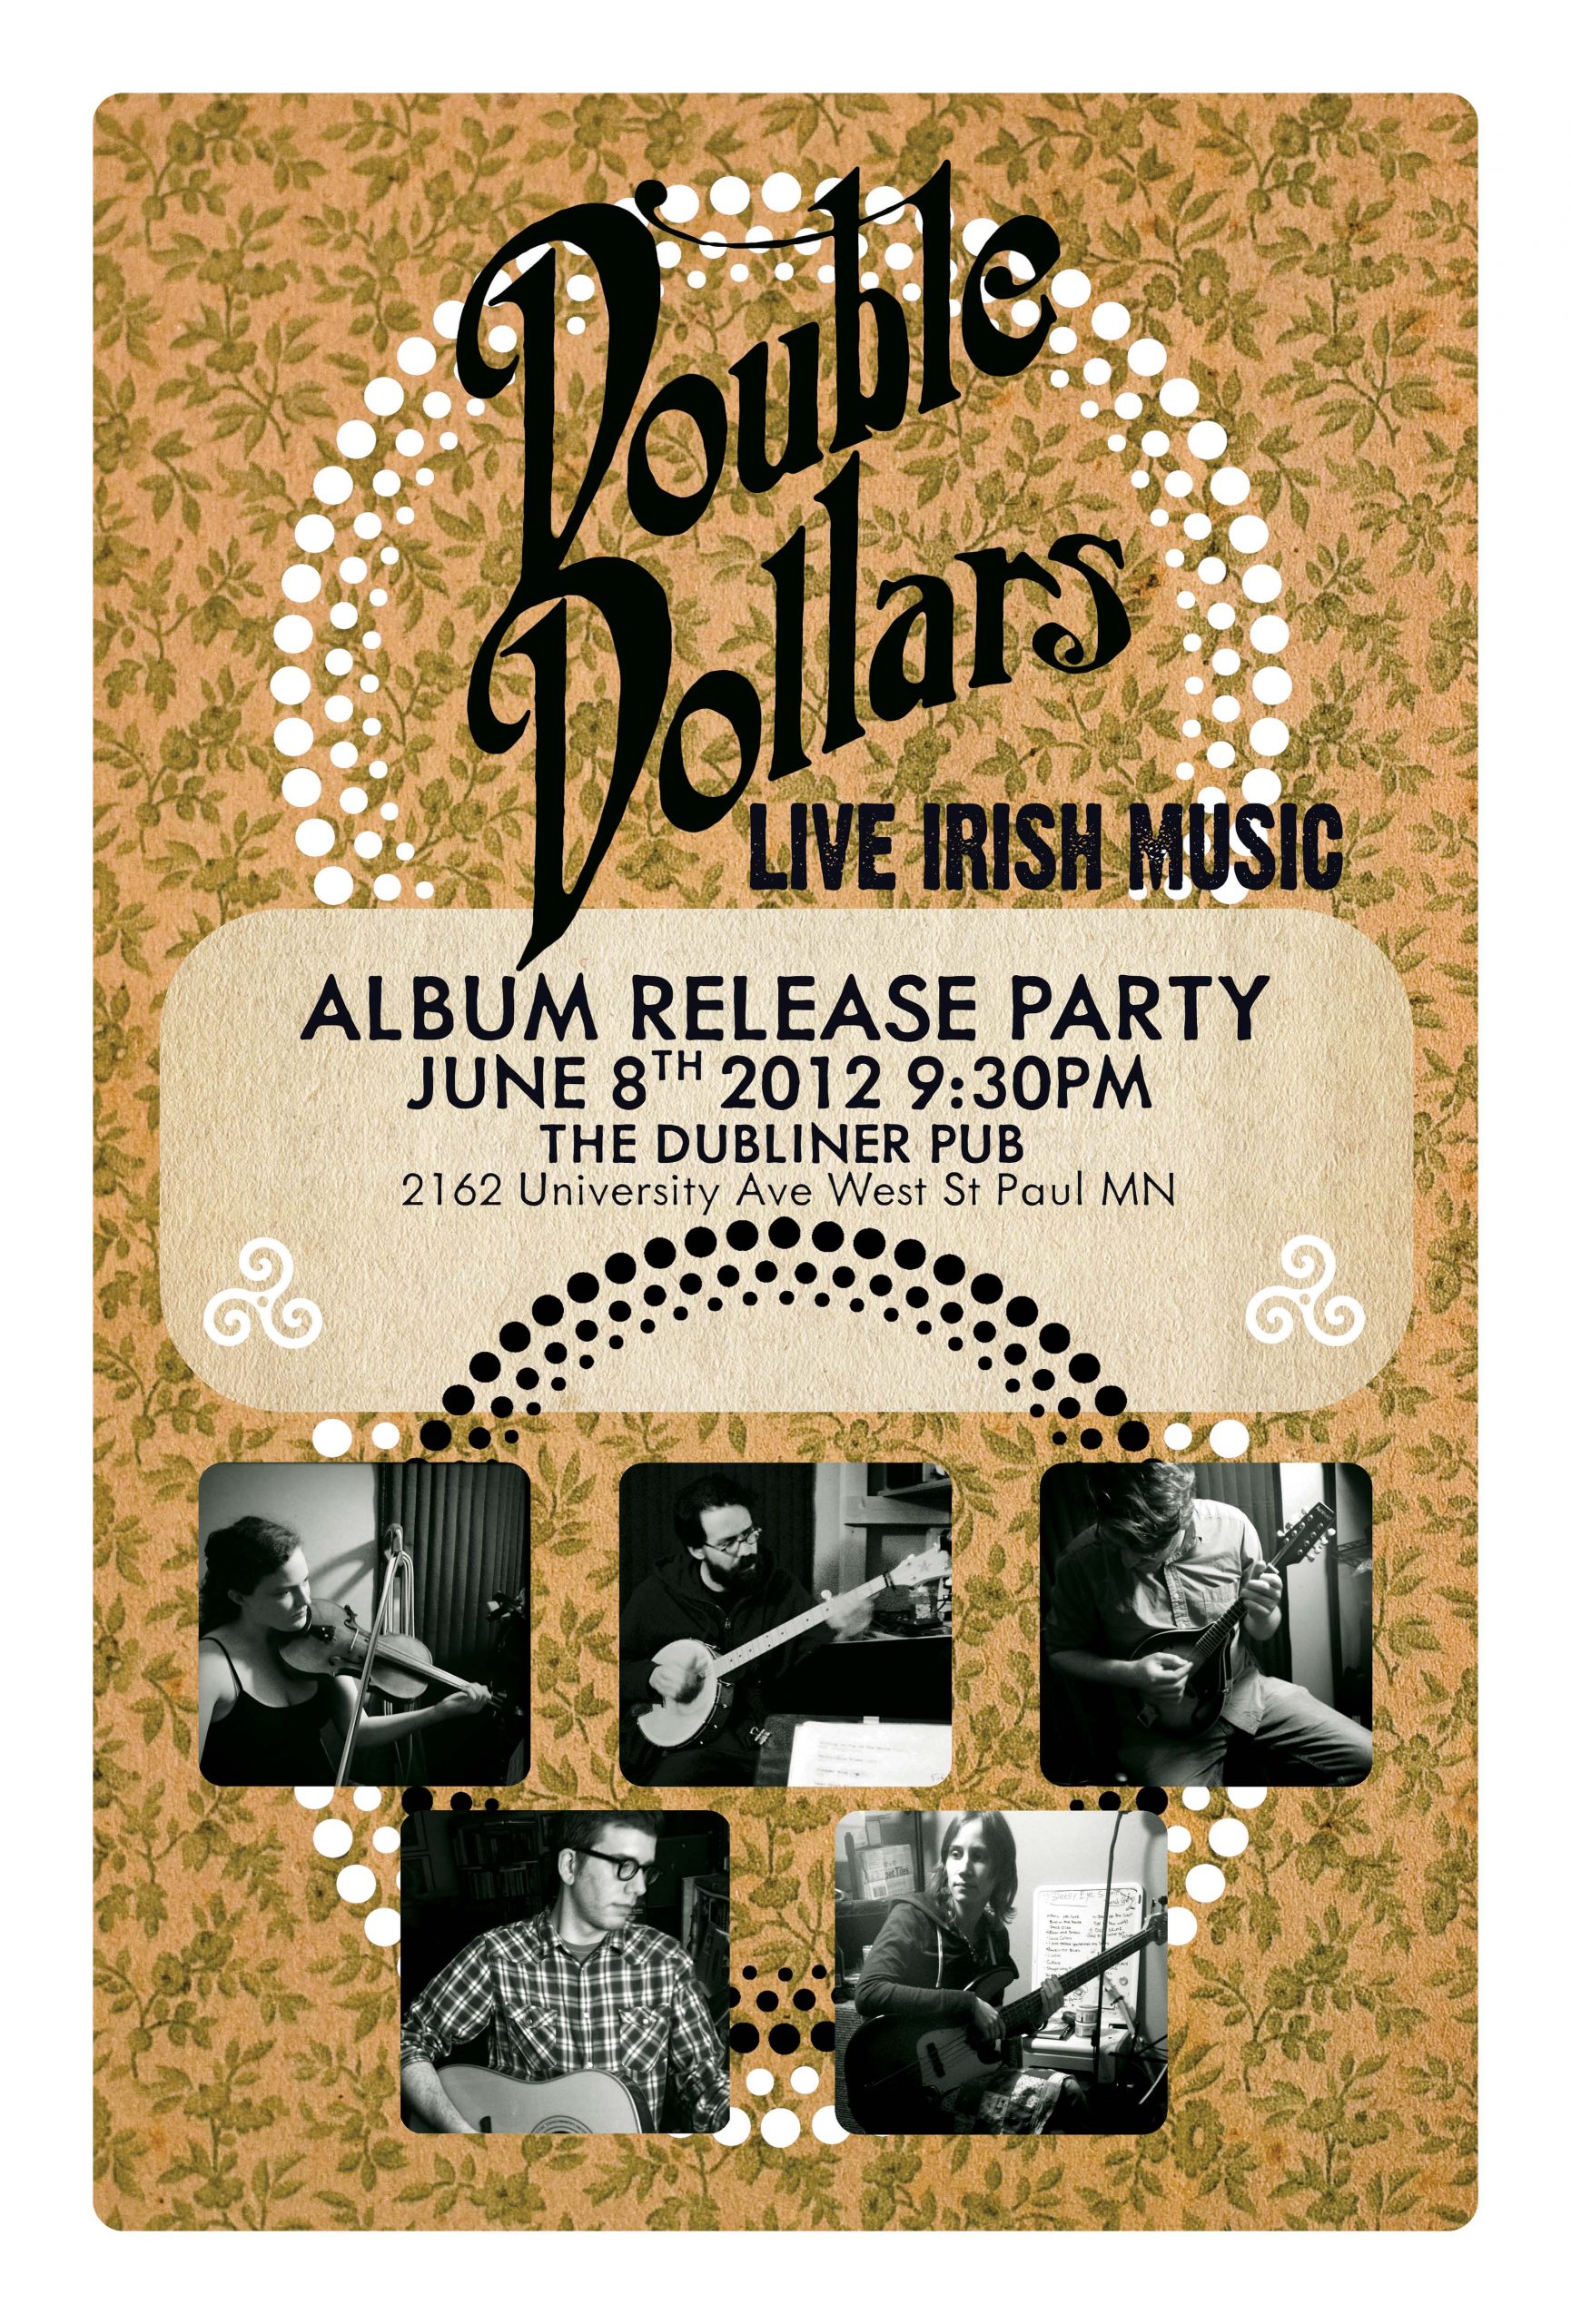 Double Dollars - CD Release Poster